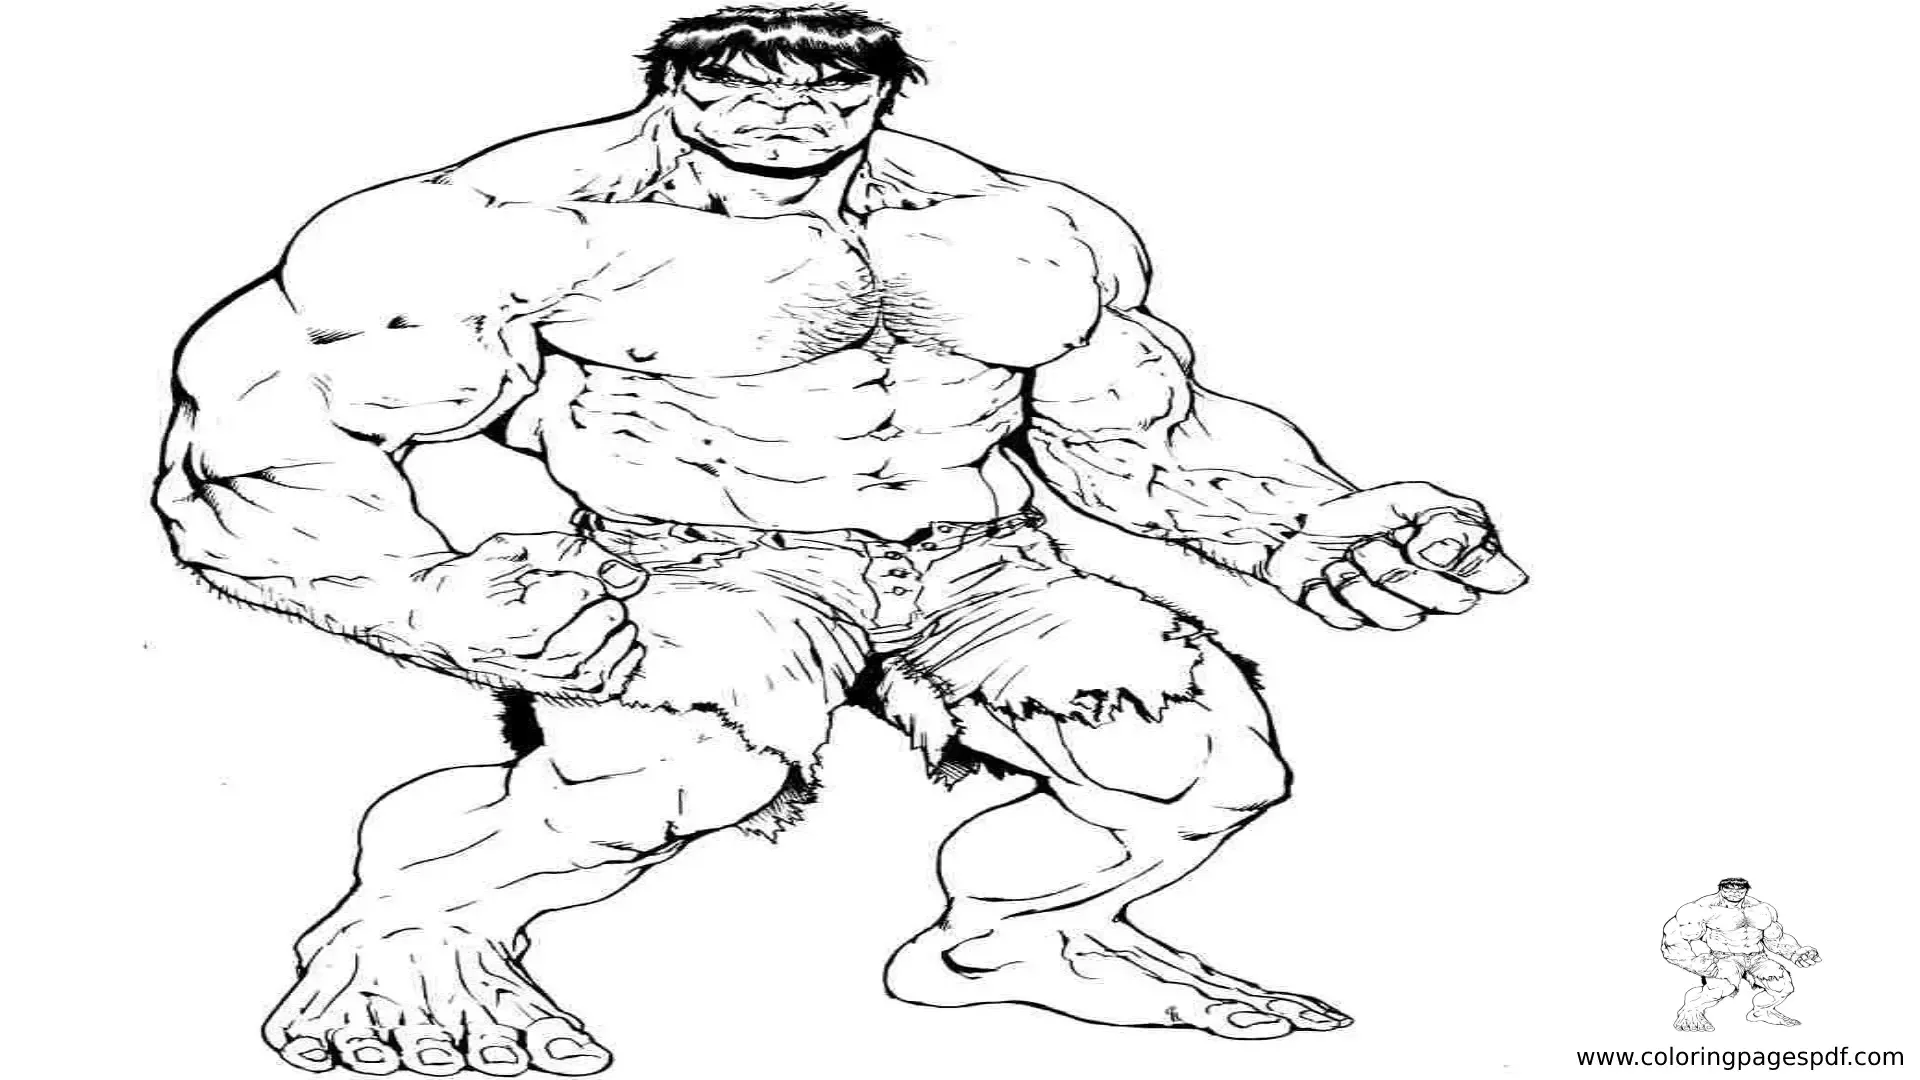 Coloring Pages Of Realistic Hulk